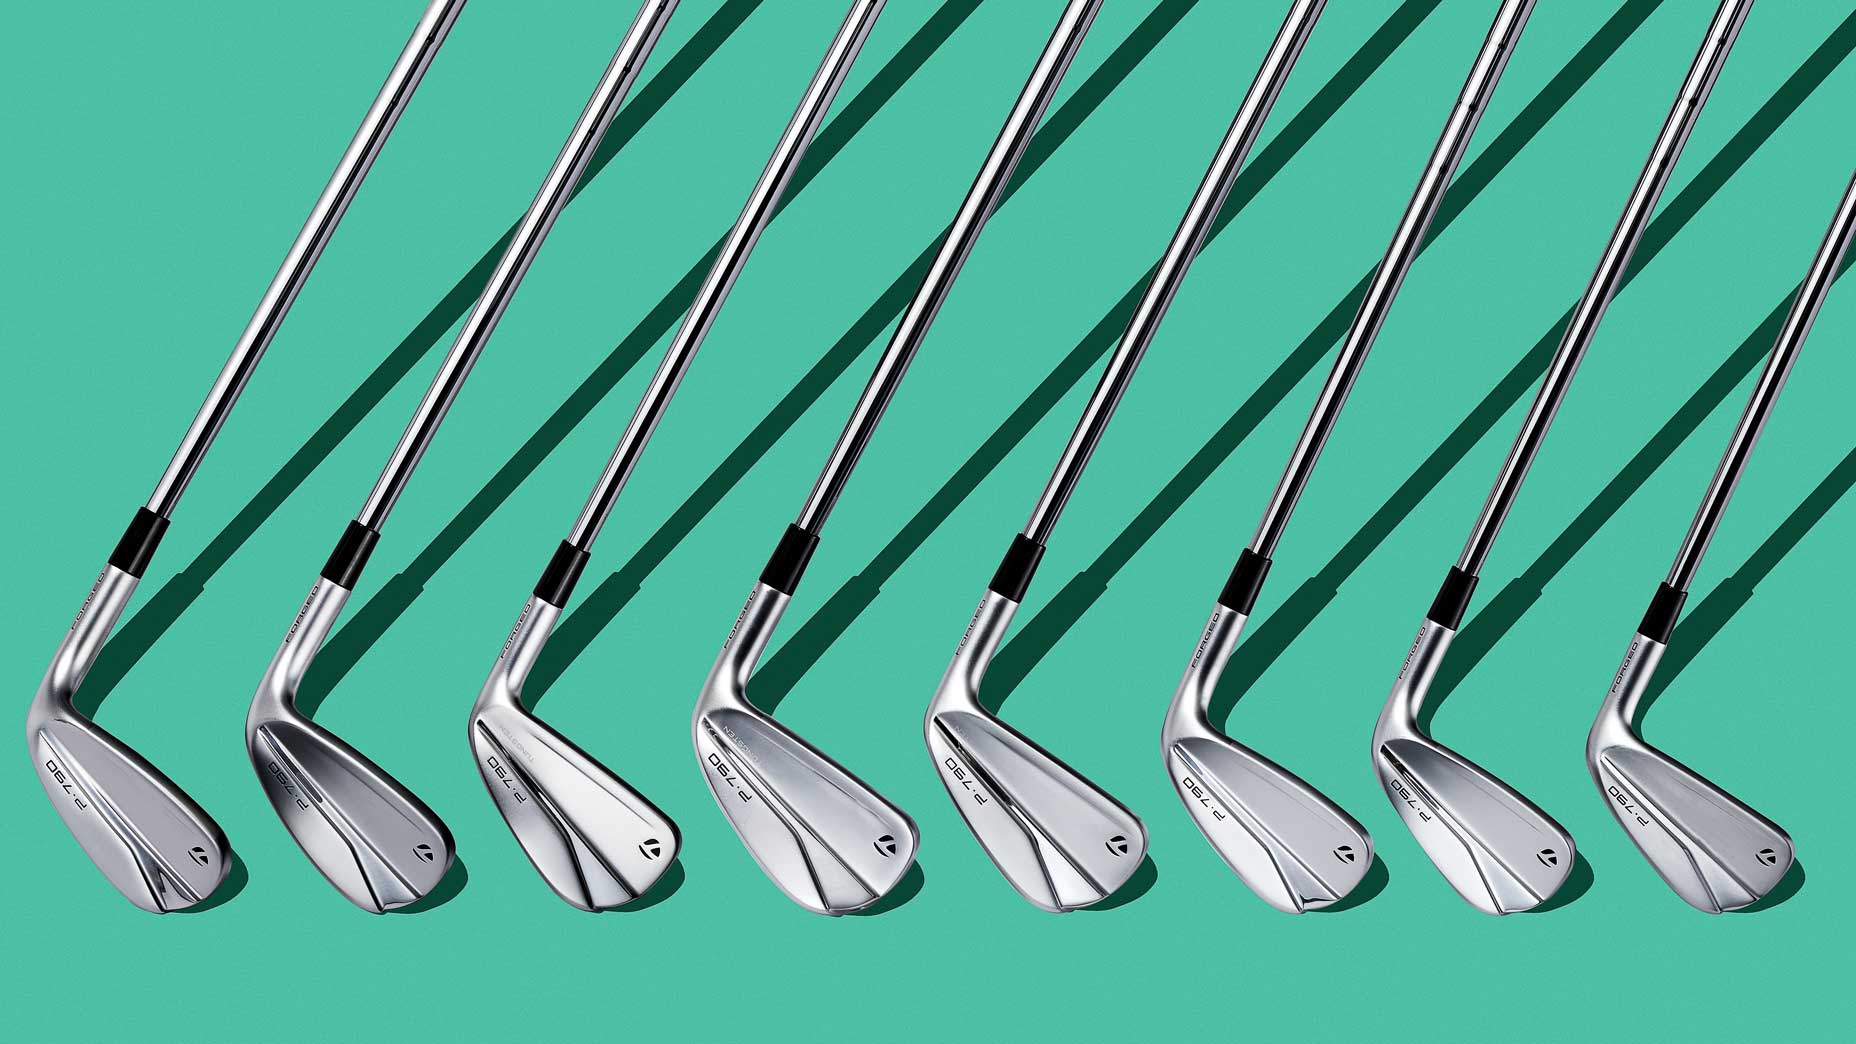 TaylorMade P790 golf irons laid out on a blue background